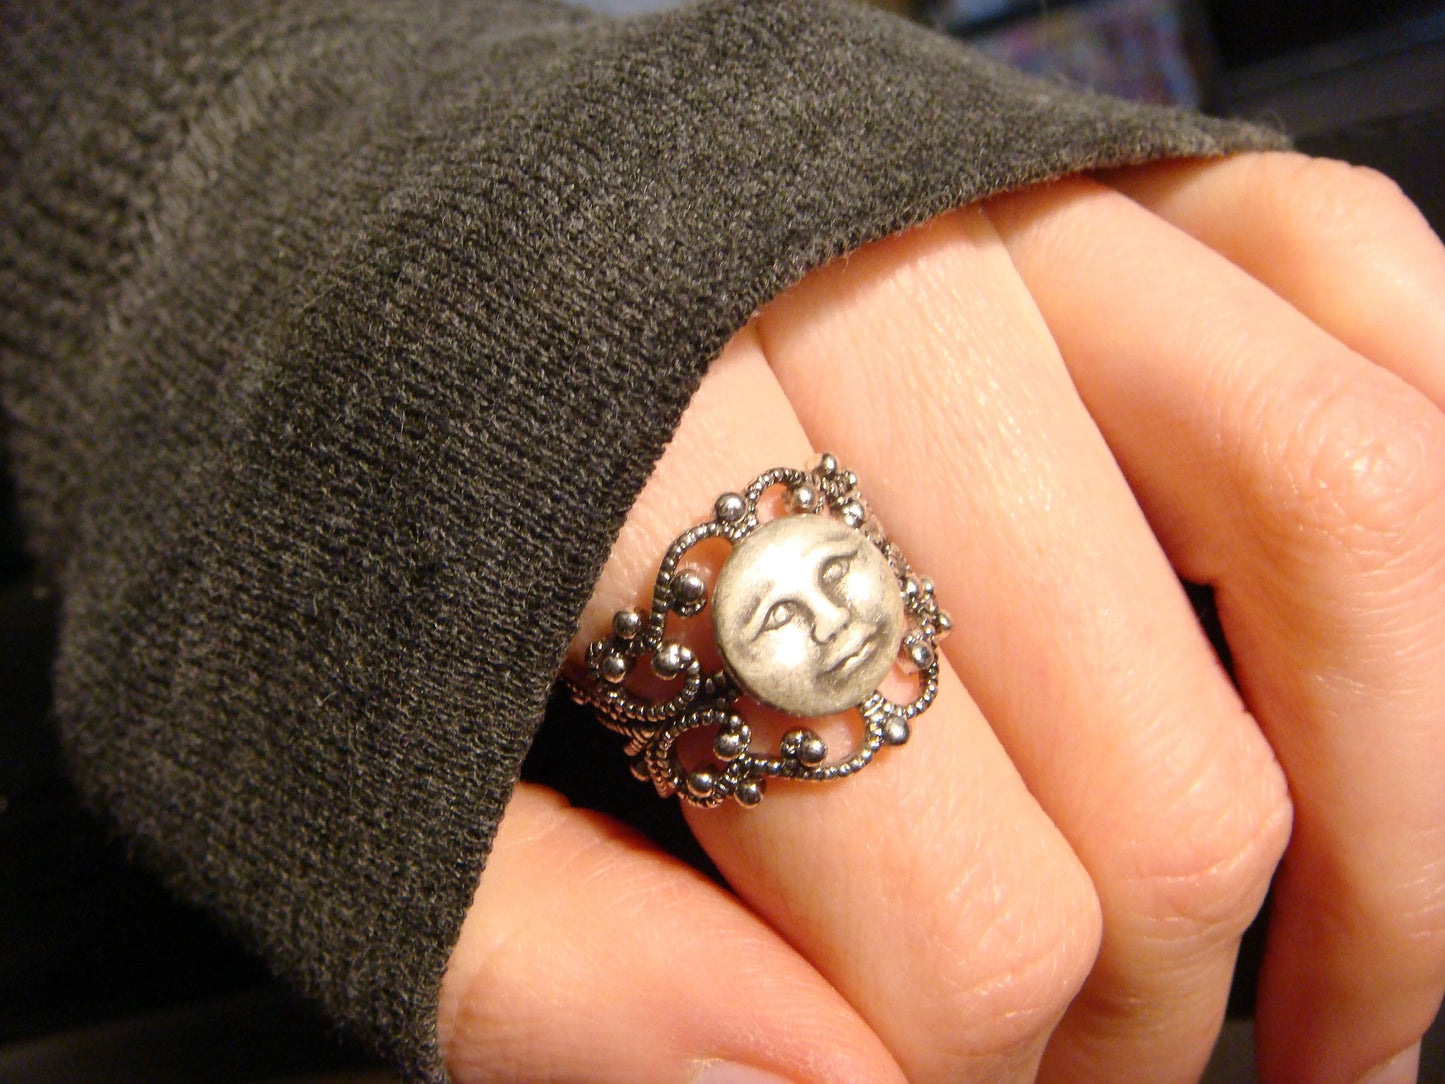 Moon Face Filigree Ring in Antique Silver - Adjustable